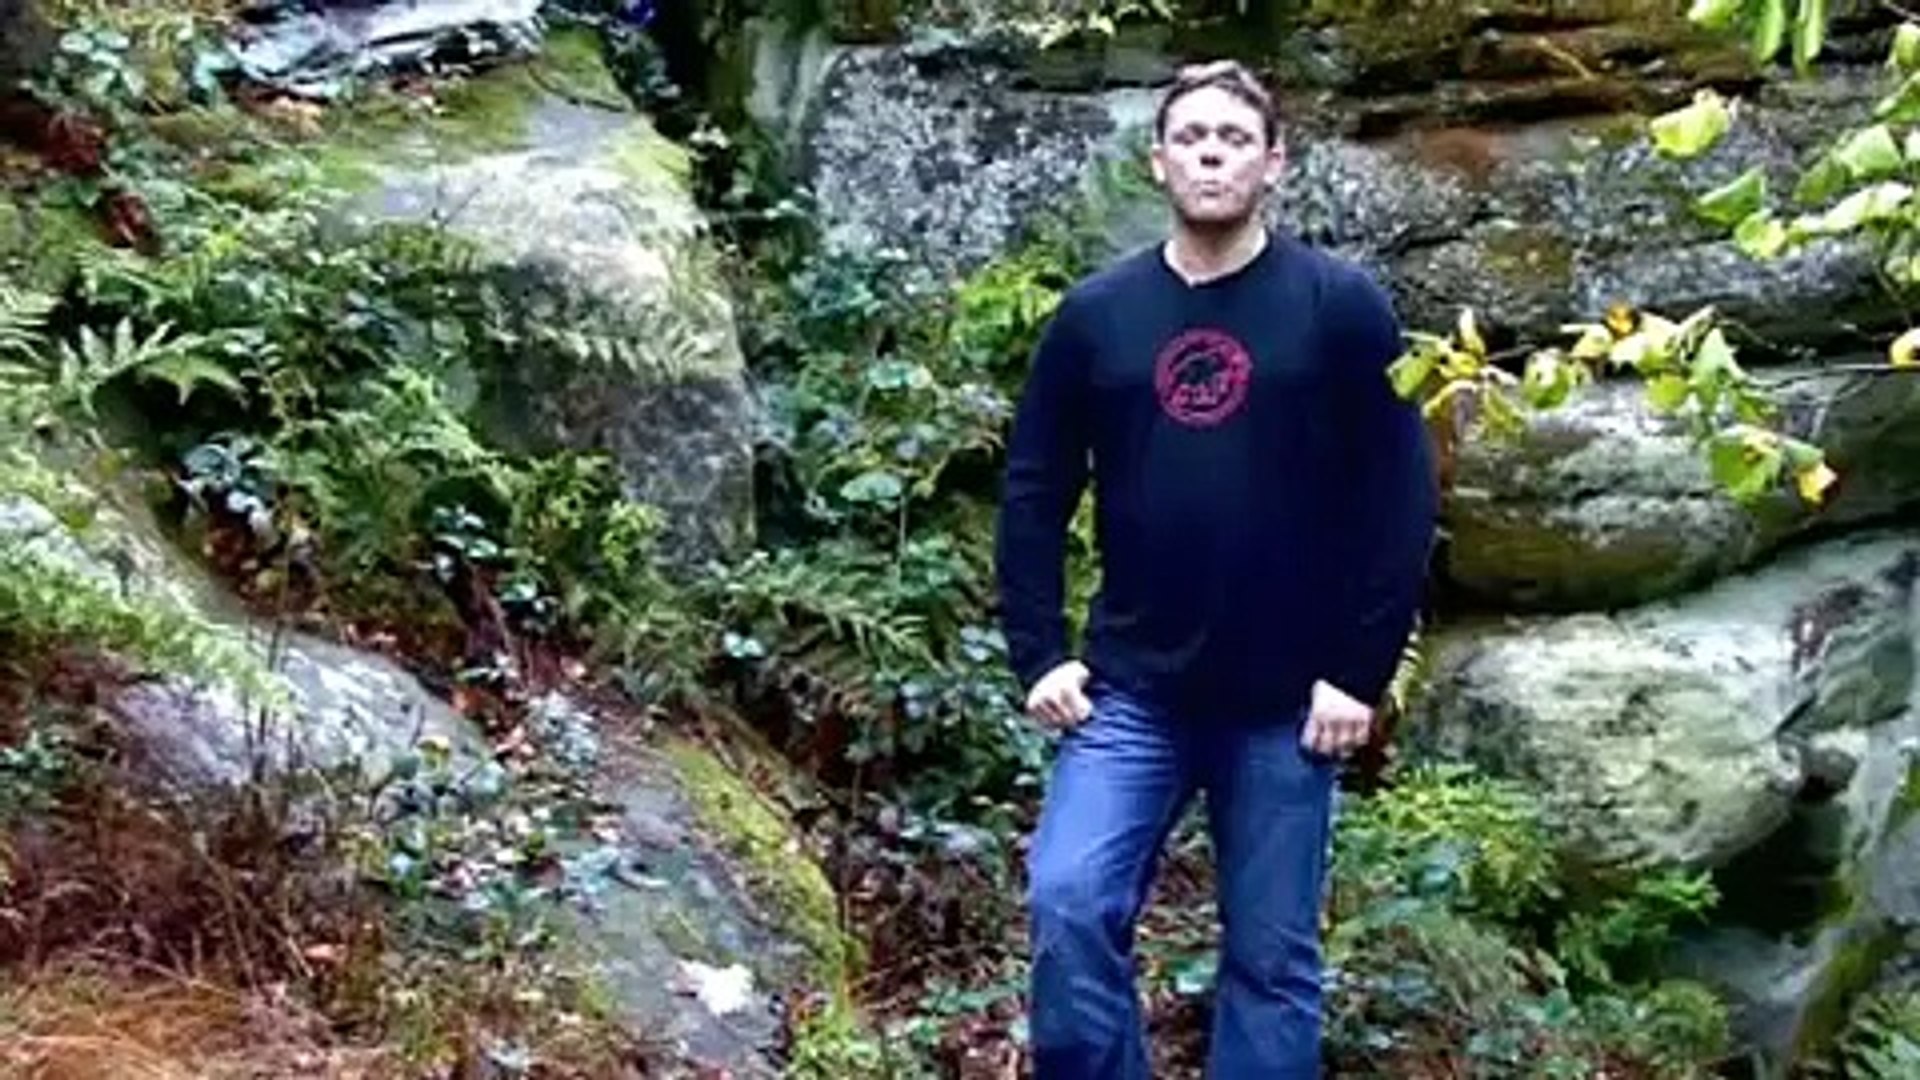 Mammut Extreme Logan Jacket Review - video Dailymotion